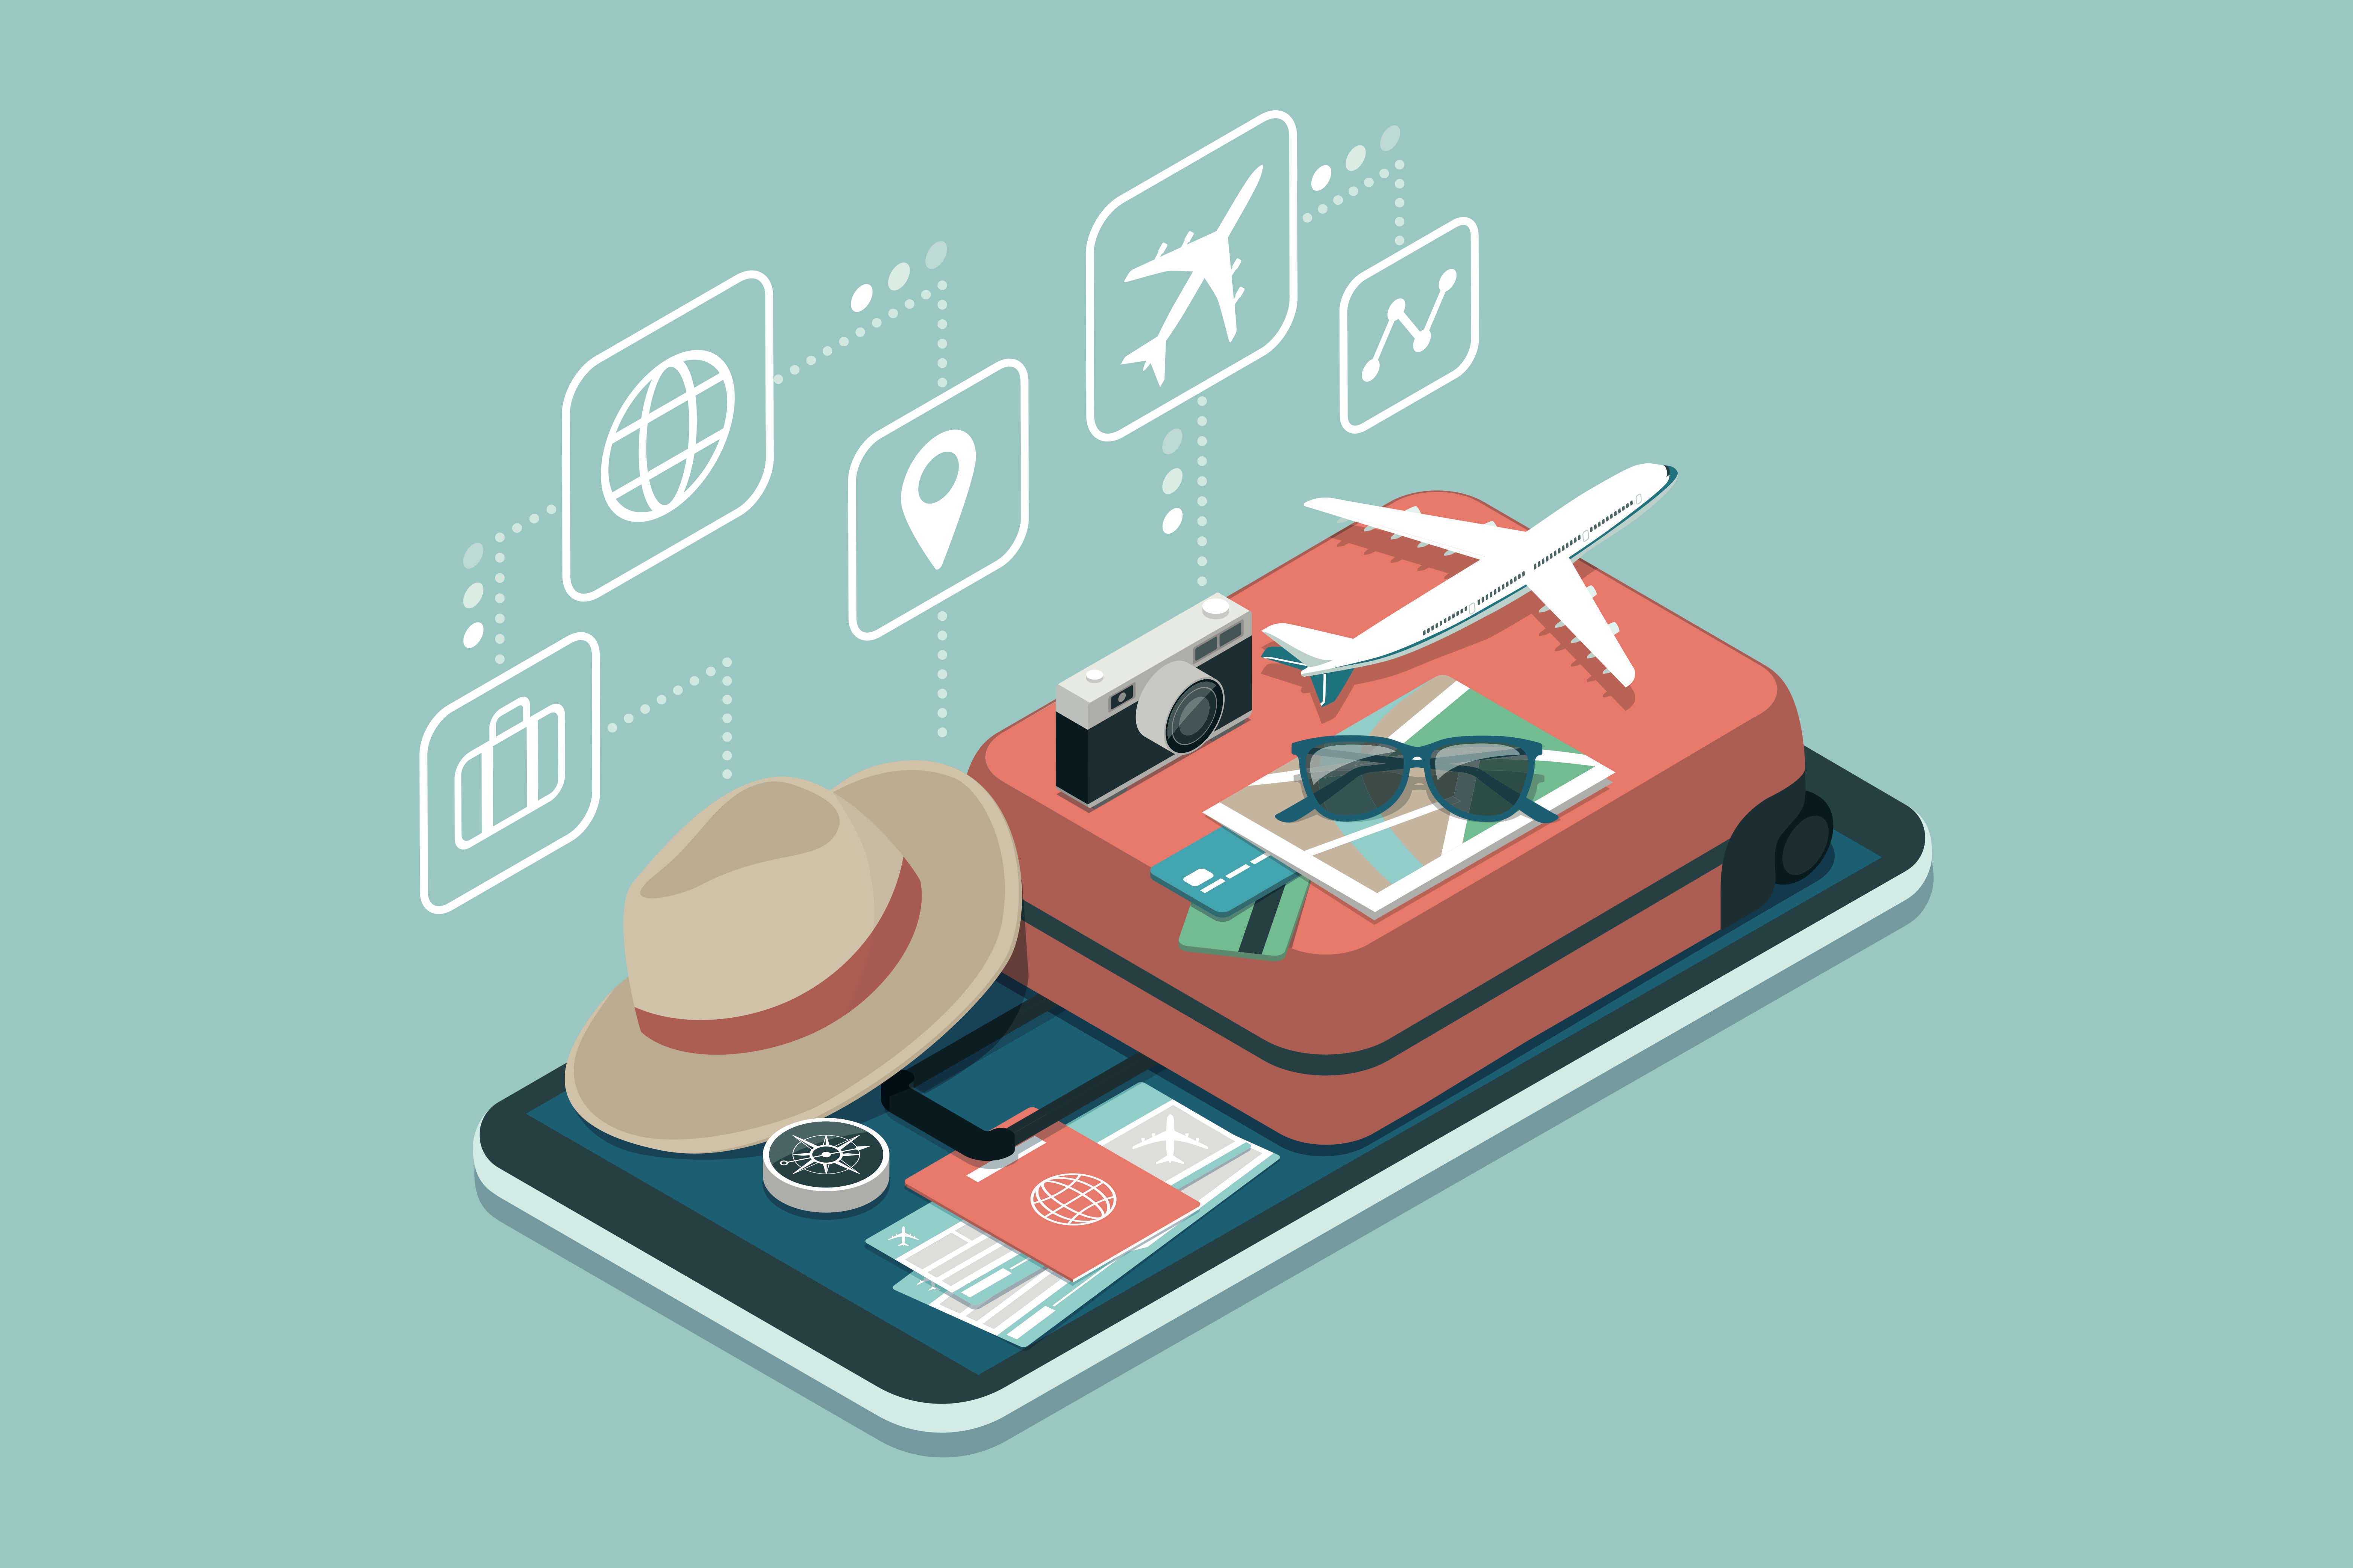 An illustration of a suitcase along with a passport, hat, camera, sunglasses and model aeroplane.